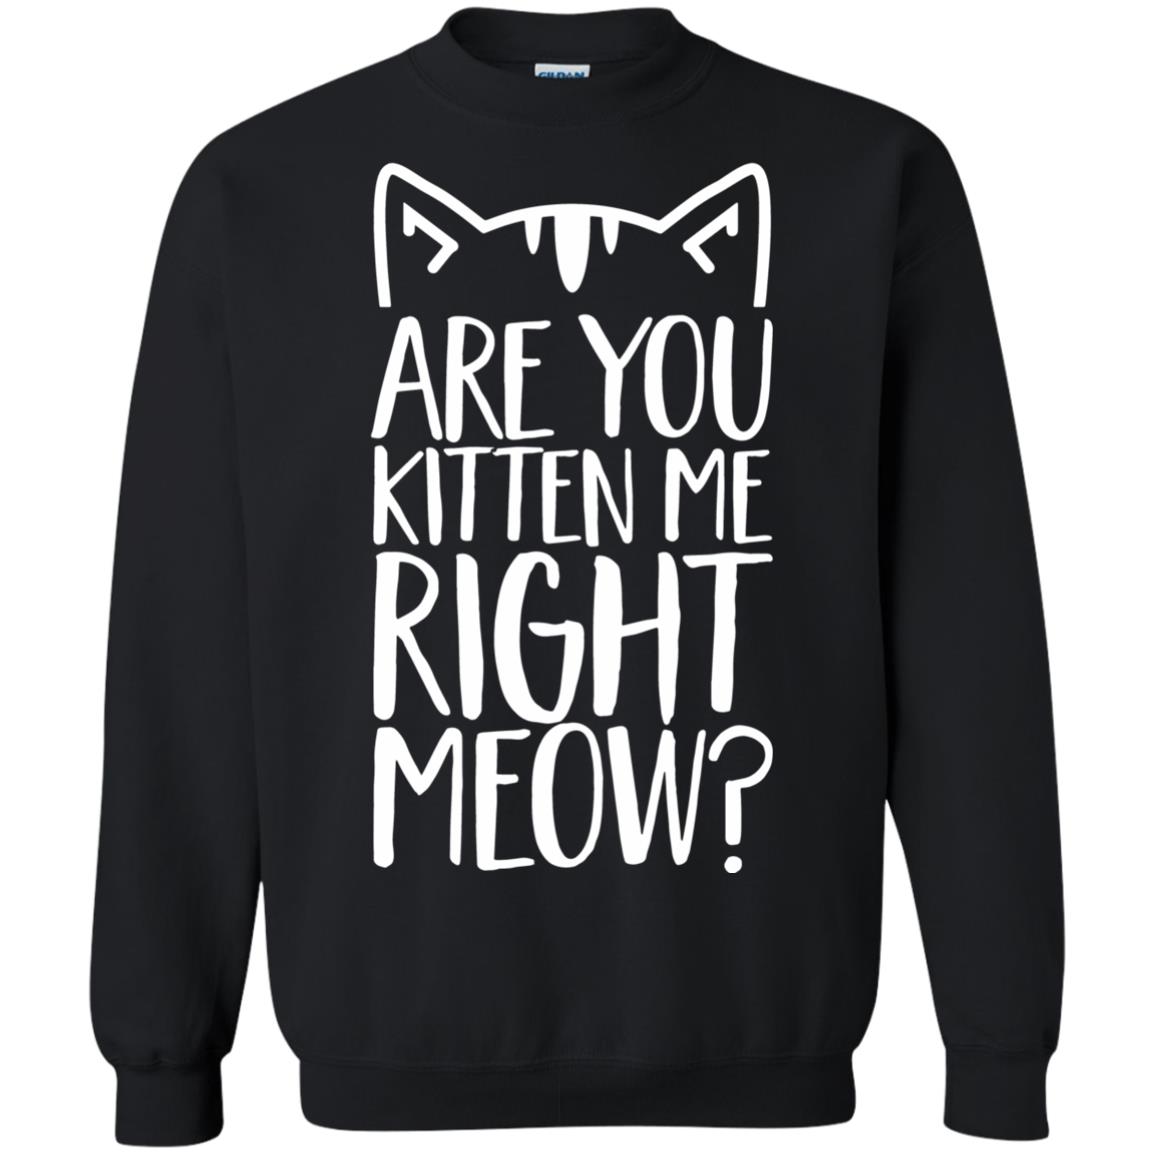 Are You Kitten Me Right Meow Shirt - 10% Off - FavorMerch